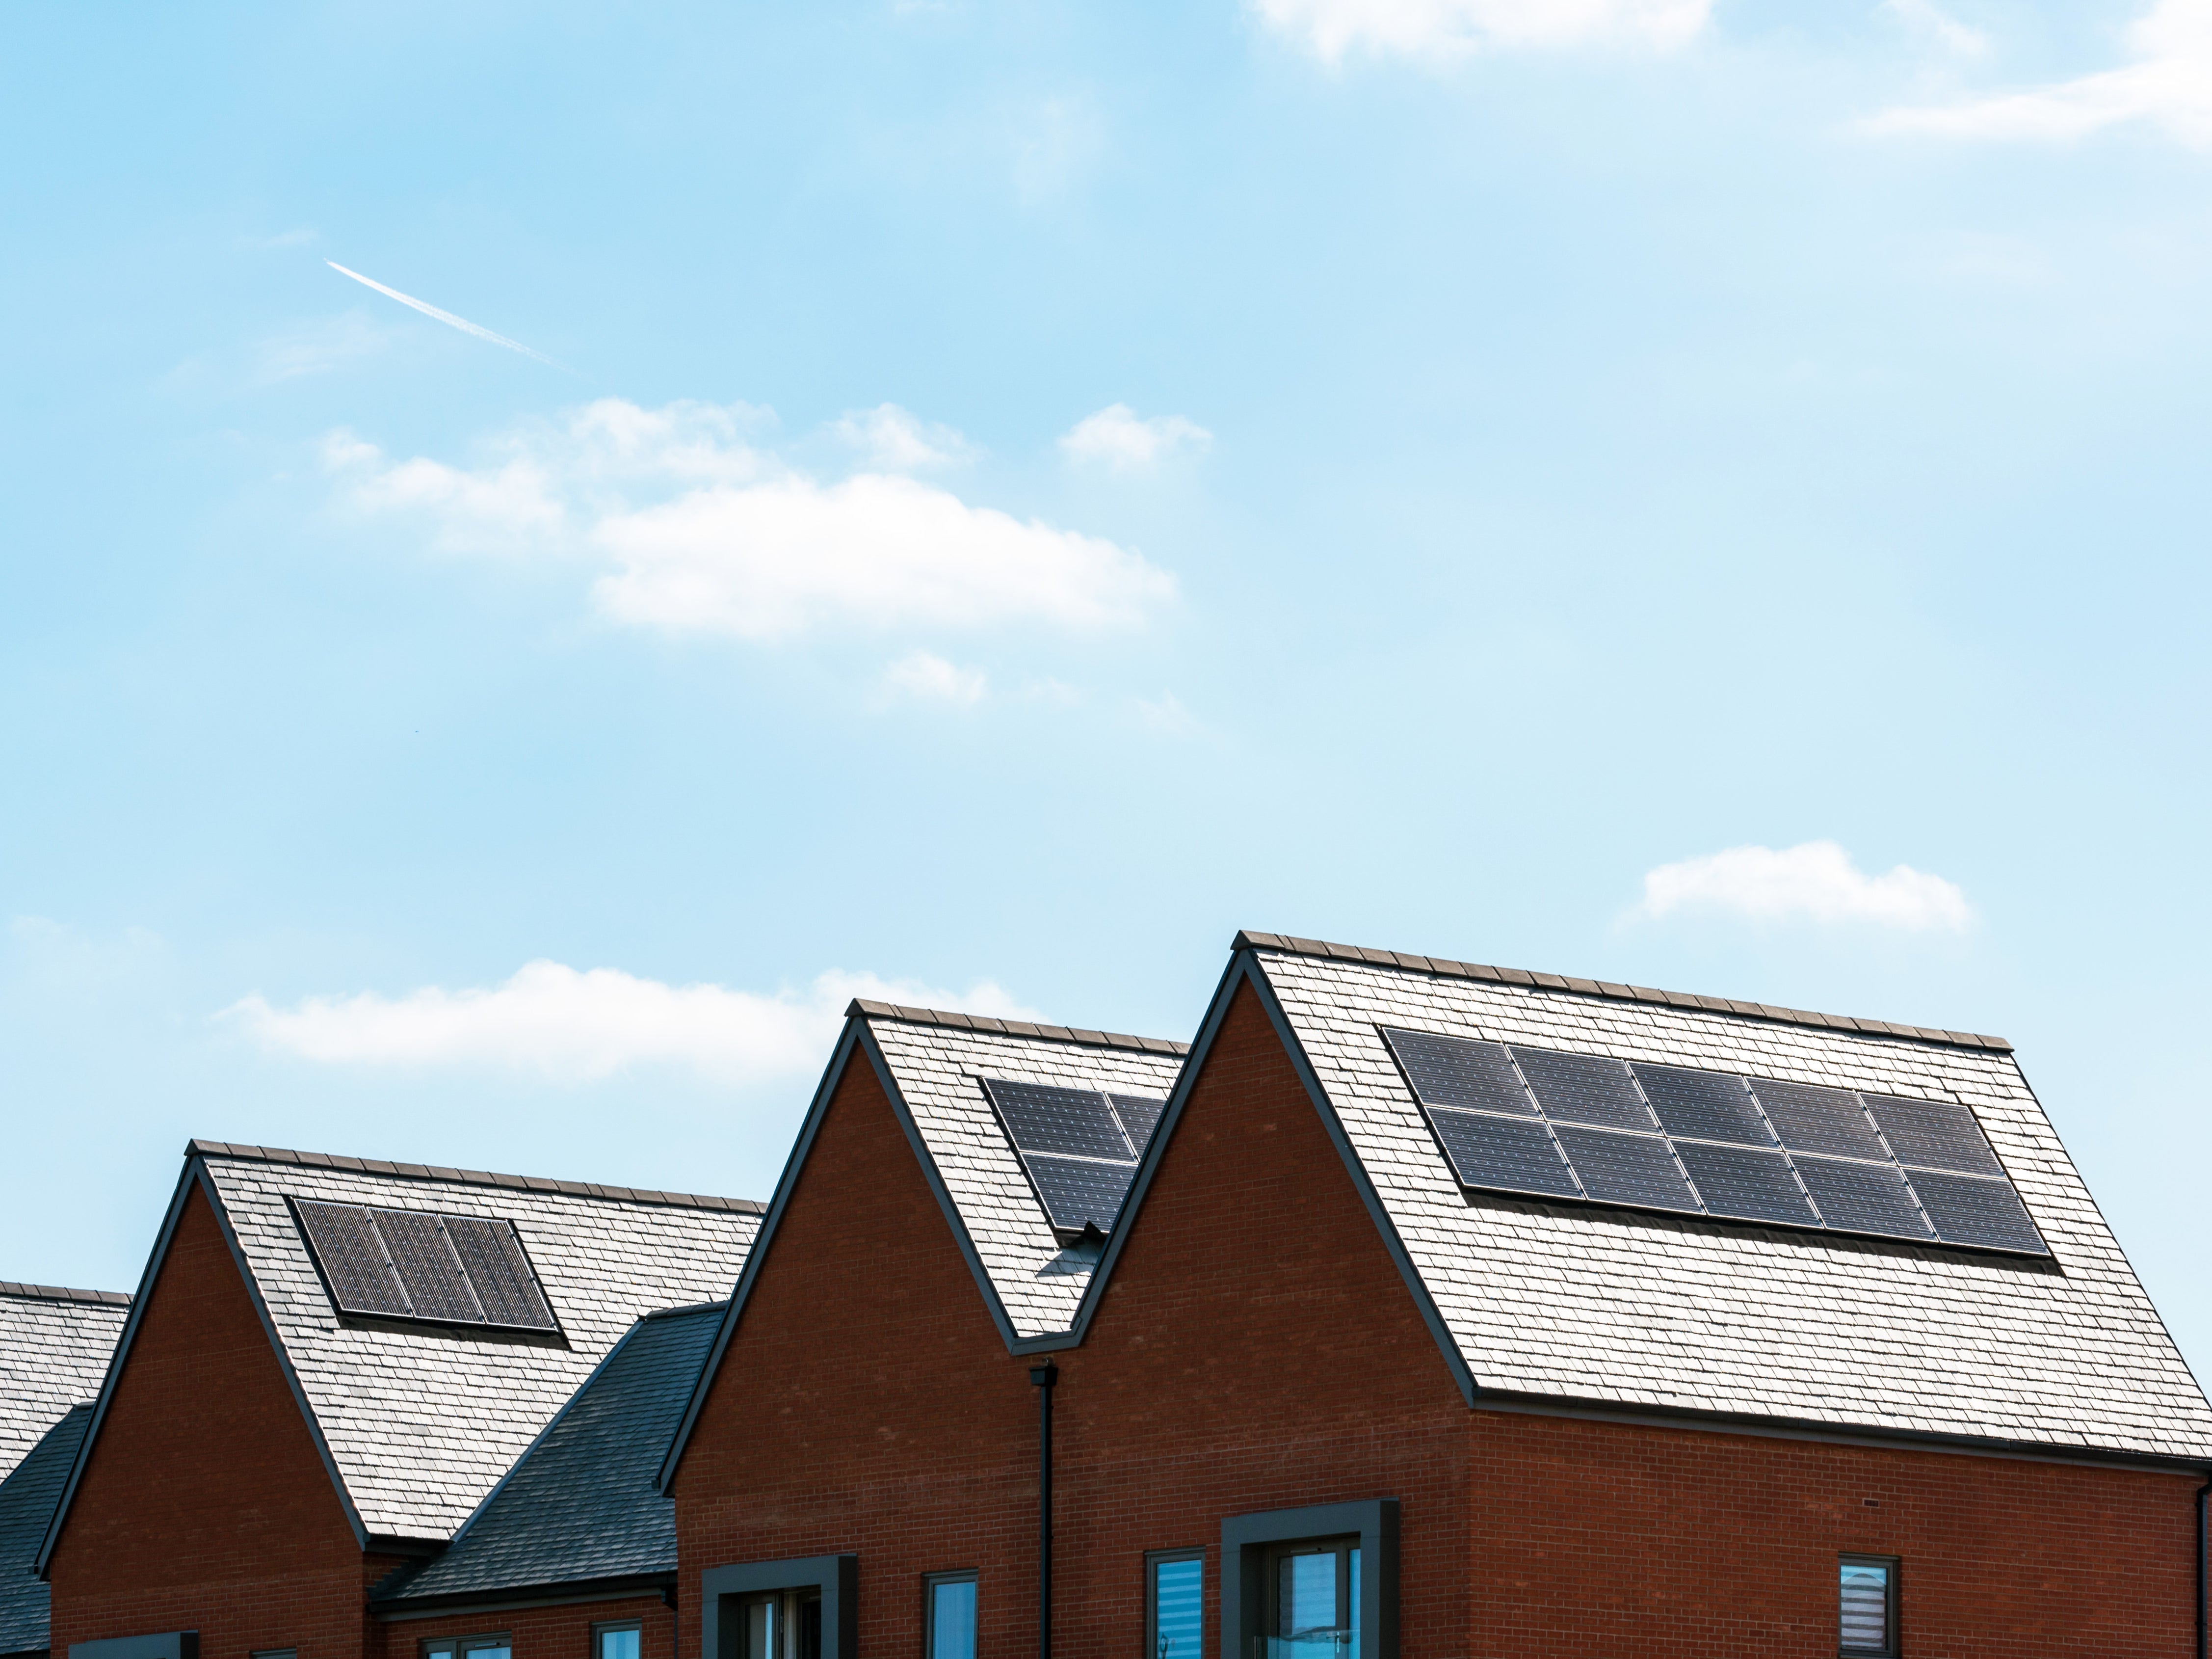 Around 70 councils have been granted funding to decarbonise social housing